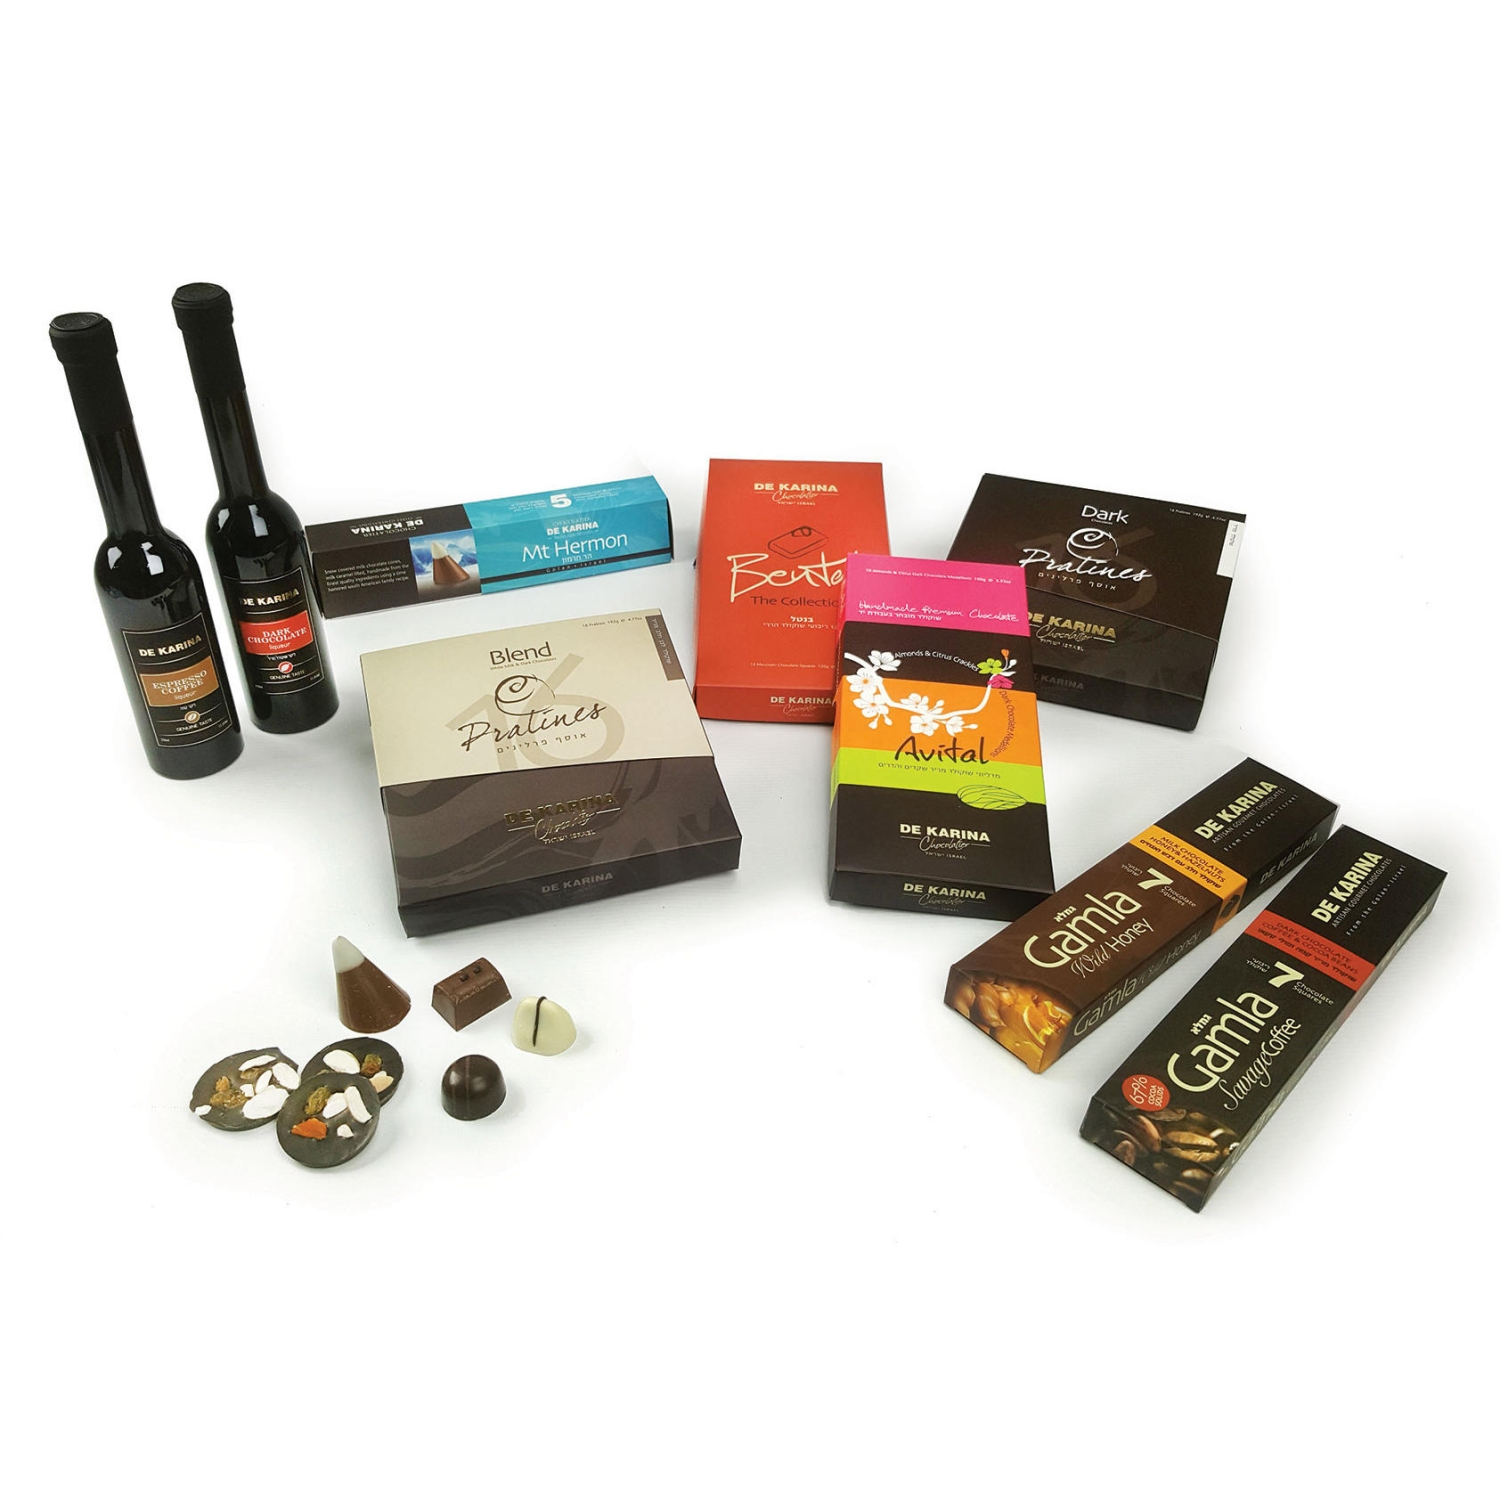 De Karina Deluxe Gift Box with Two Liqueurs - 1